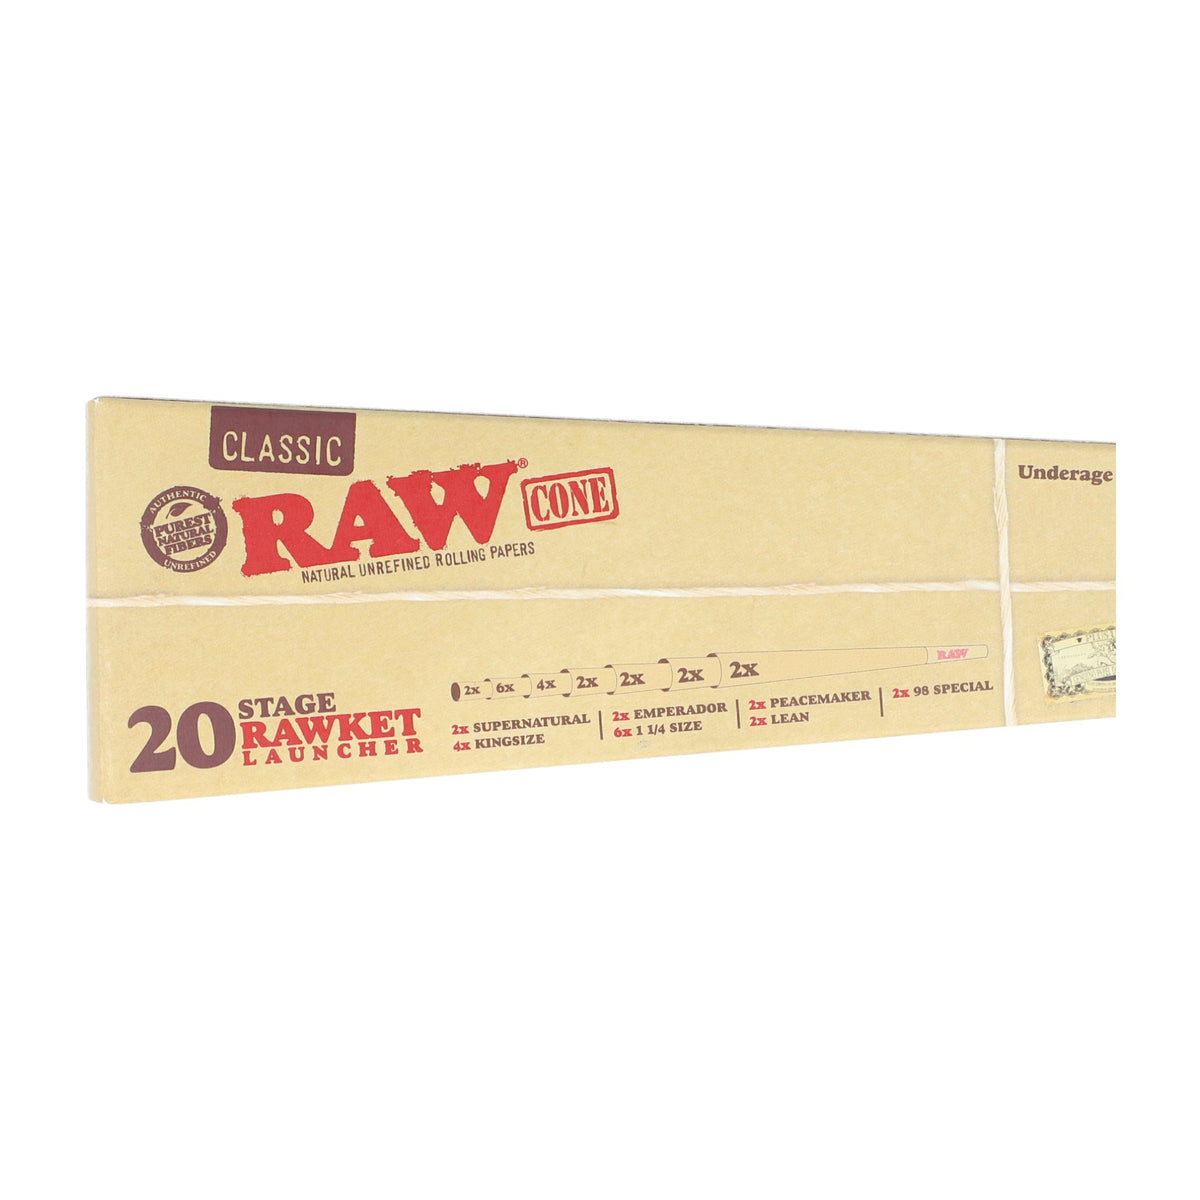 RAW 20 Stage RAWket Launcher Pack RAW Cones esd-official